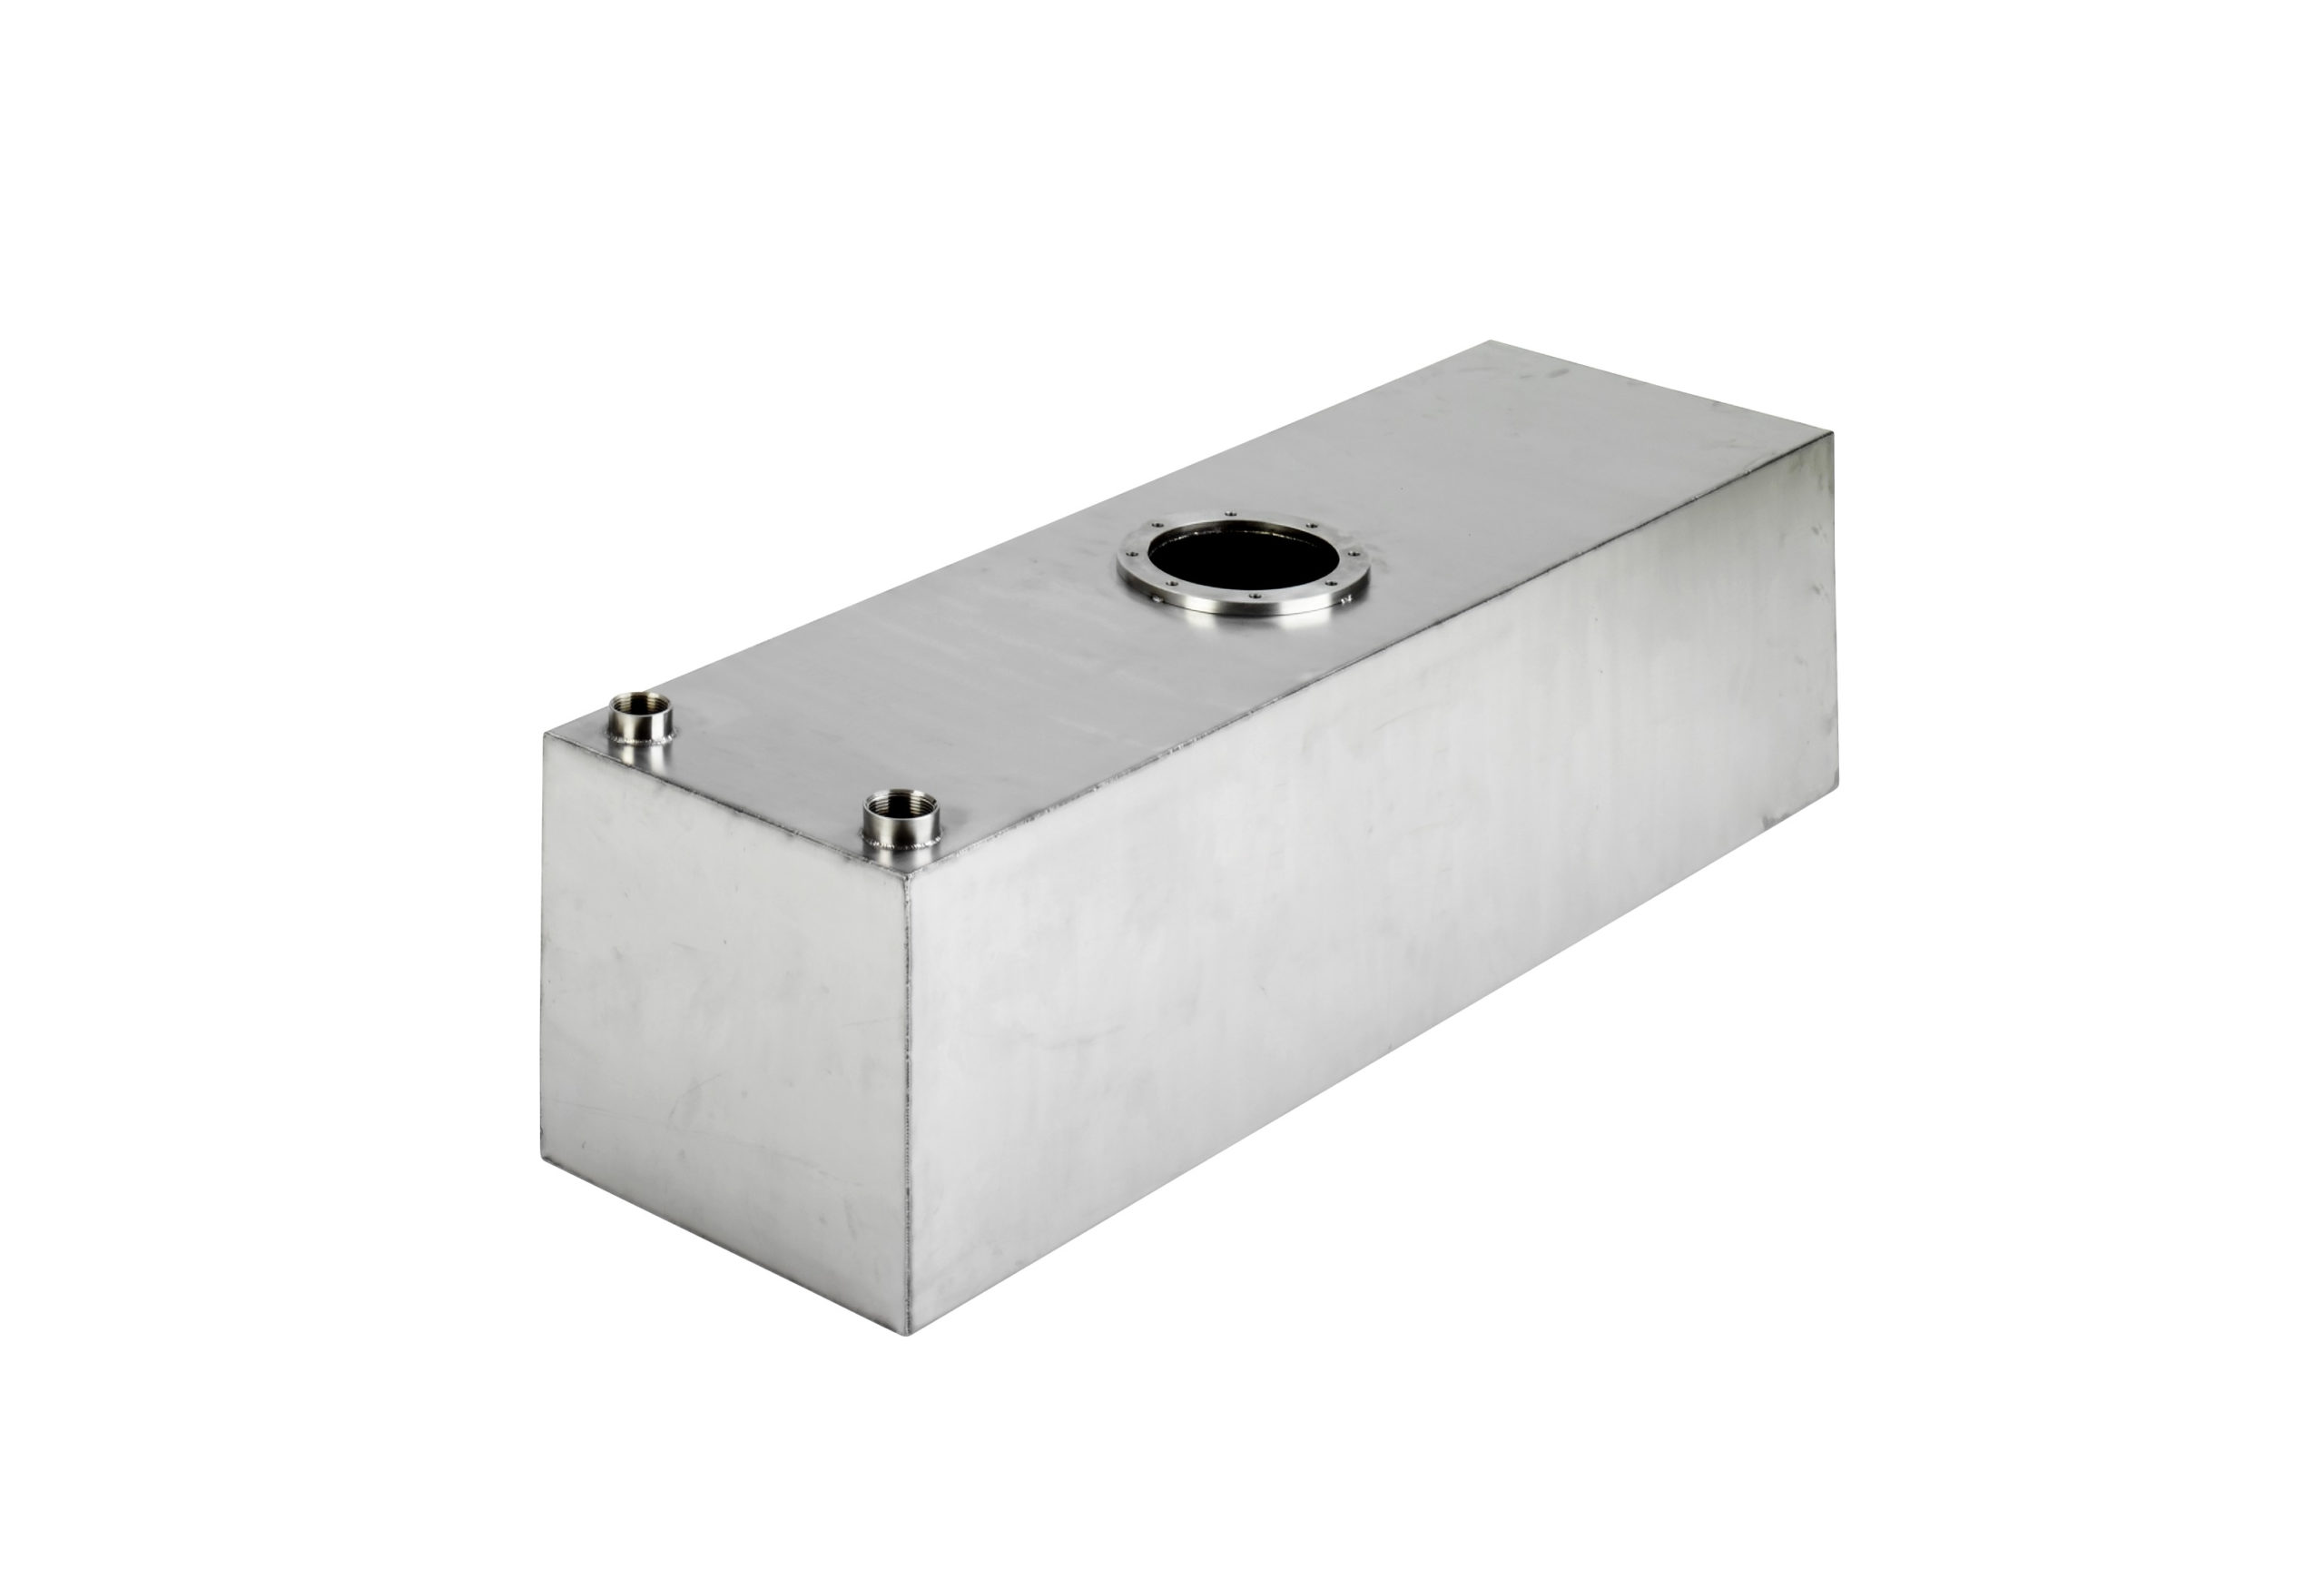 120 Litre Stainless Steel Tank - Drinking Water or Waste Water